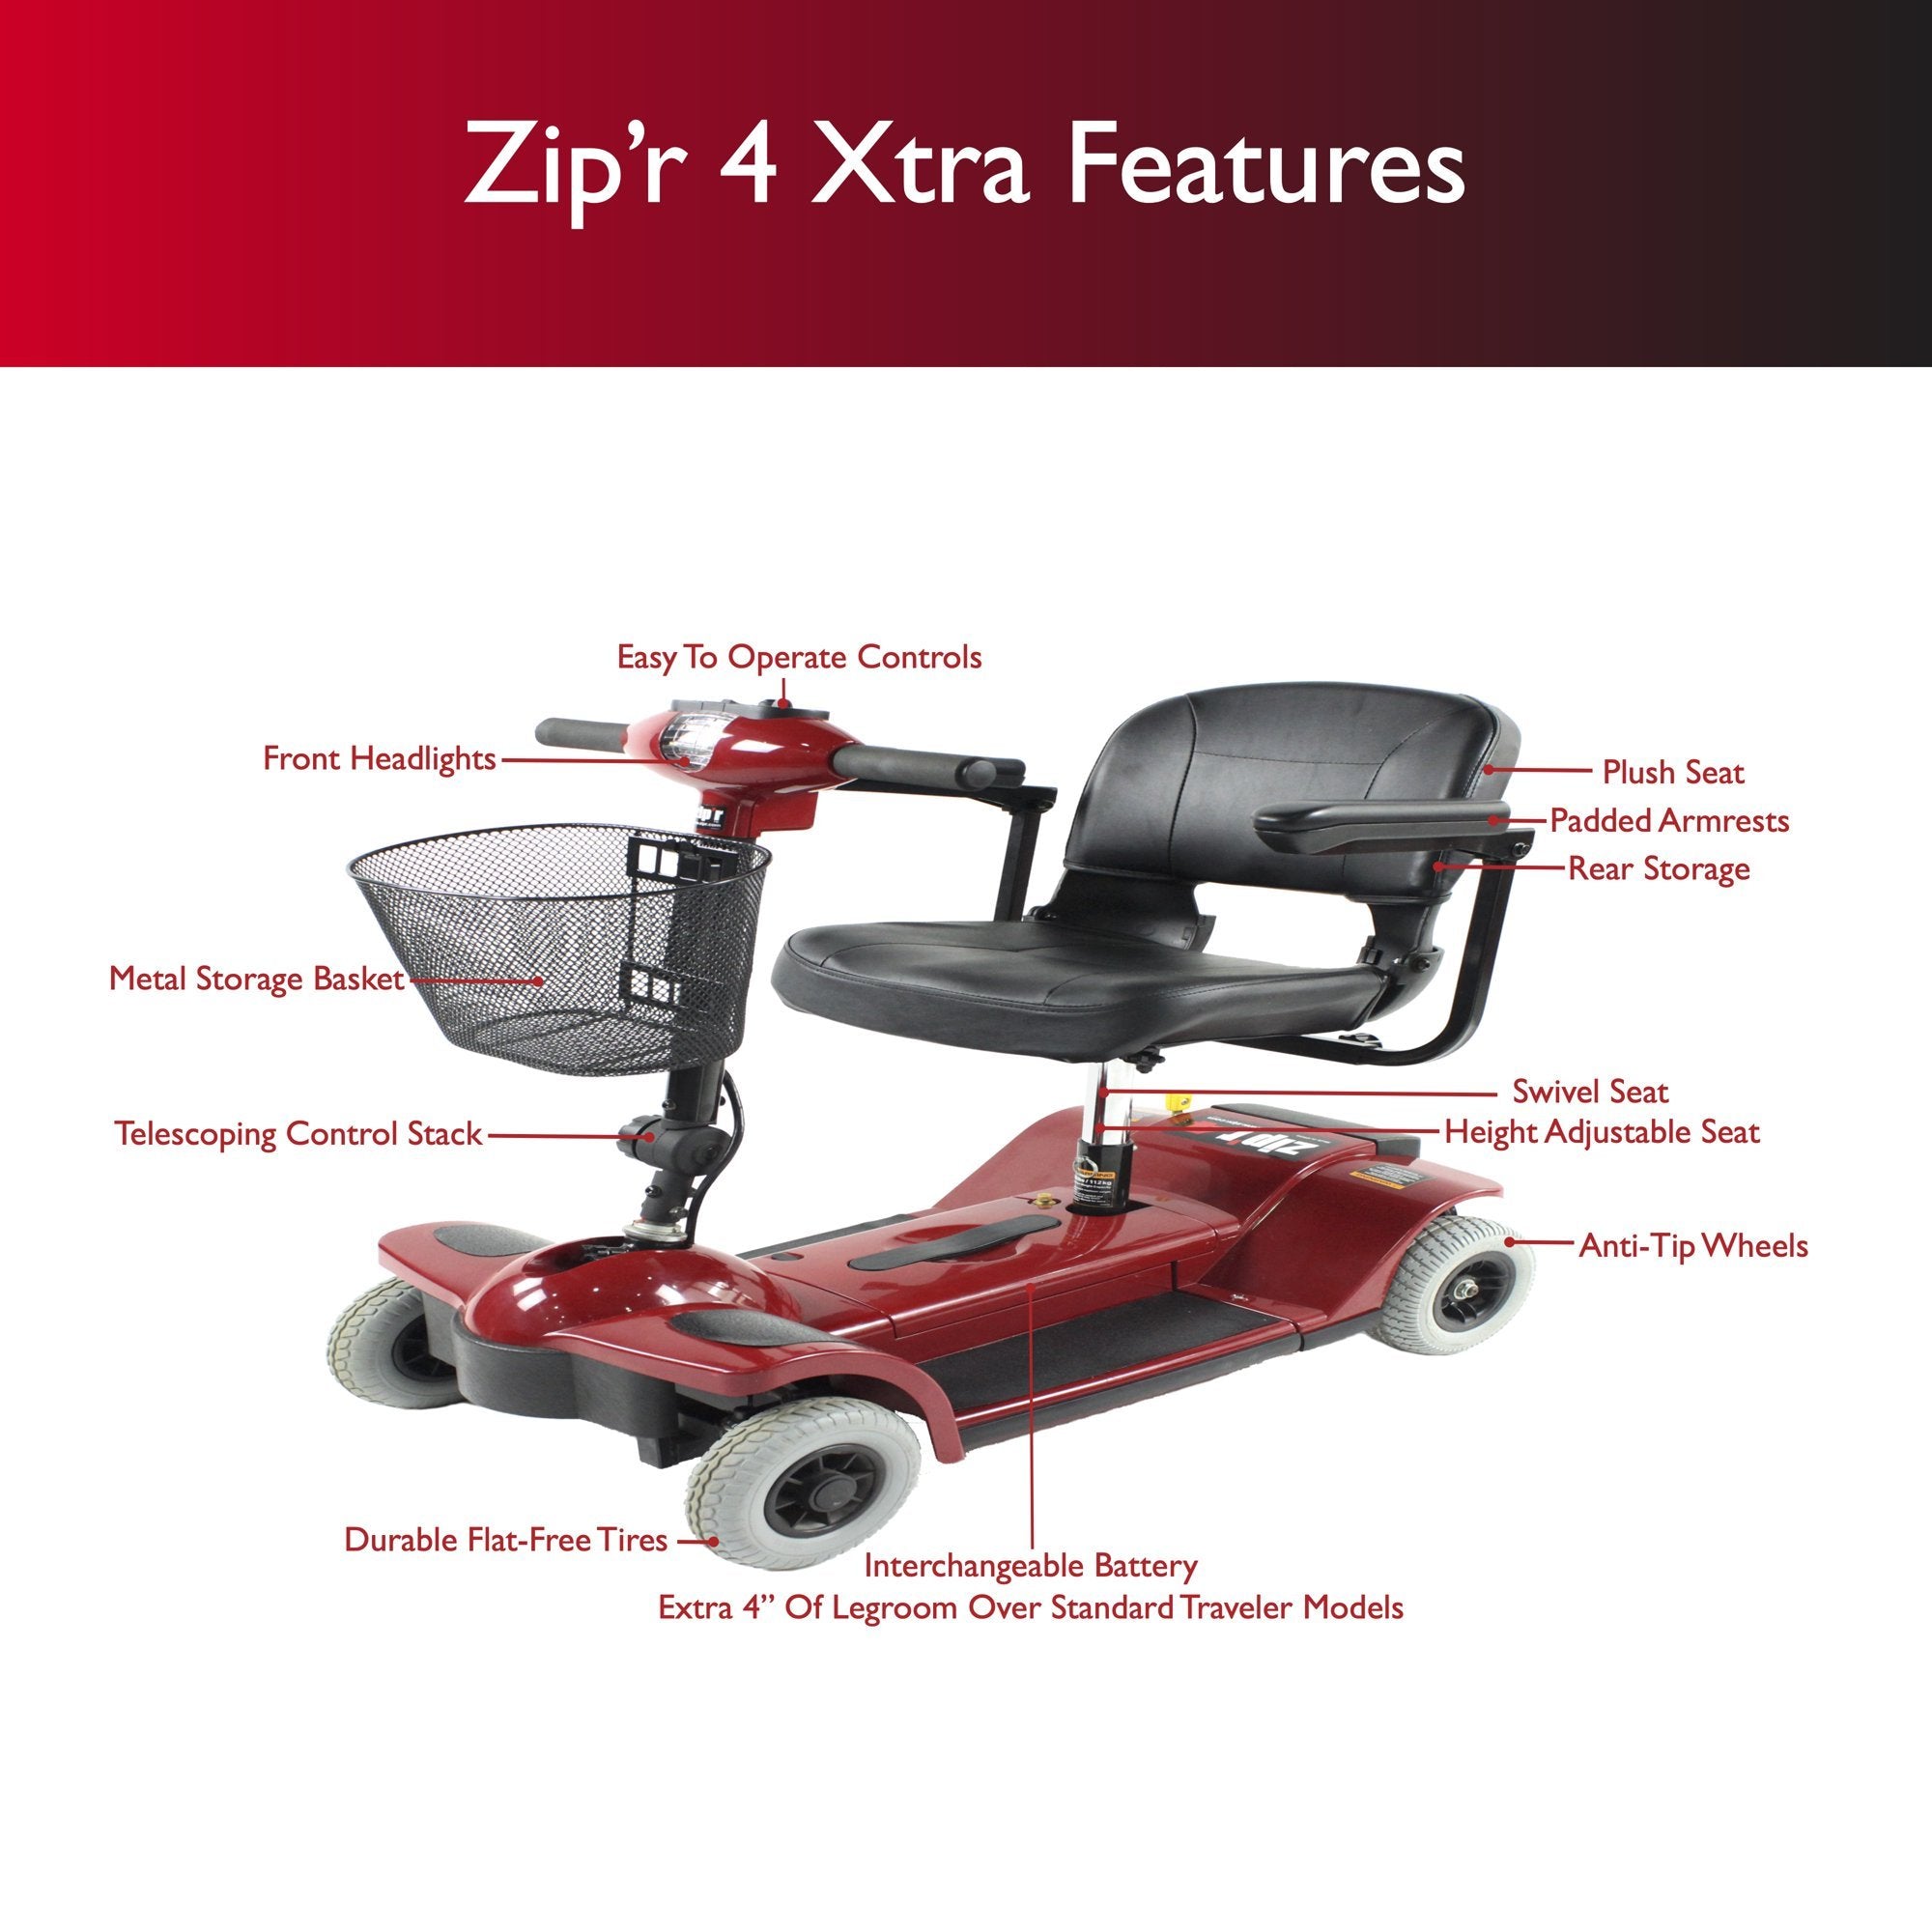 Zip'r, Zip'r 4 XTRA Traveler Long Range Mobility Scooter Red New